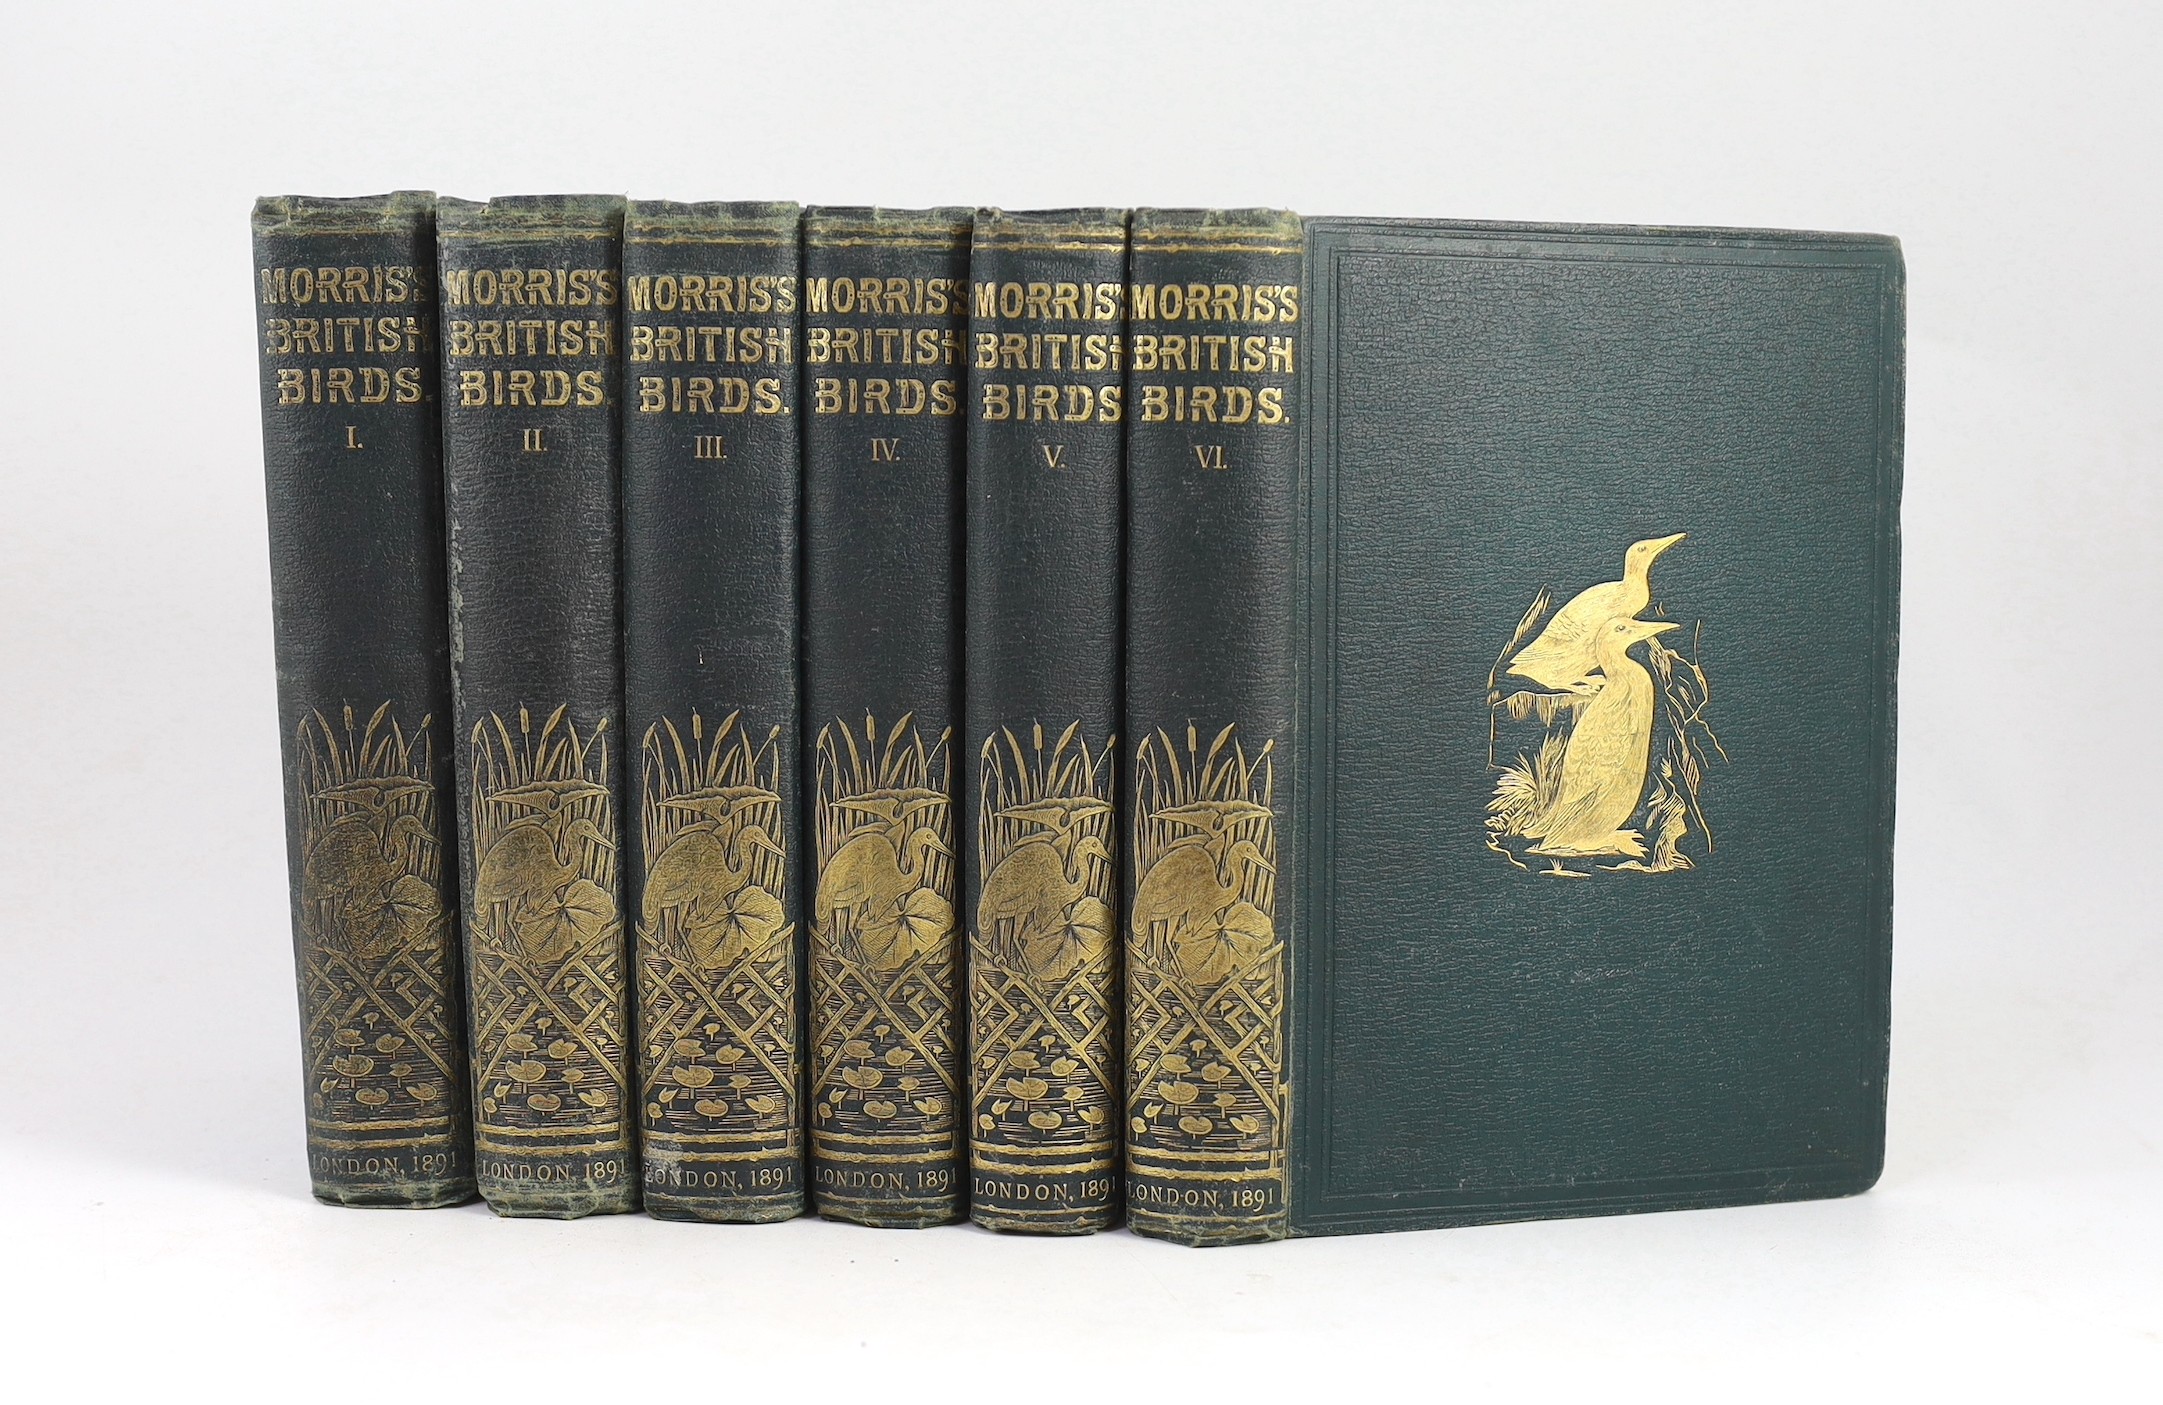 Morris, Francis Orpen - A History of British Birds, 3rd edition, 6 vols, 8vo original cloth pictorial gilt, with 394 hand-coloured plates, spines bumped, John C. Nimmo, London, 1891